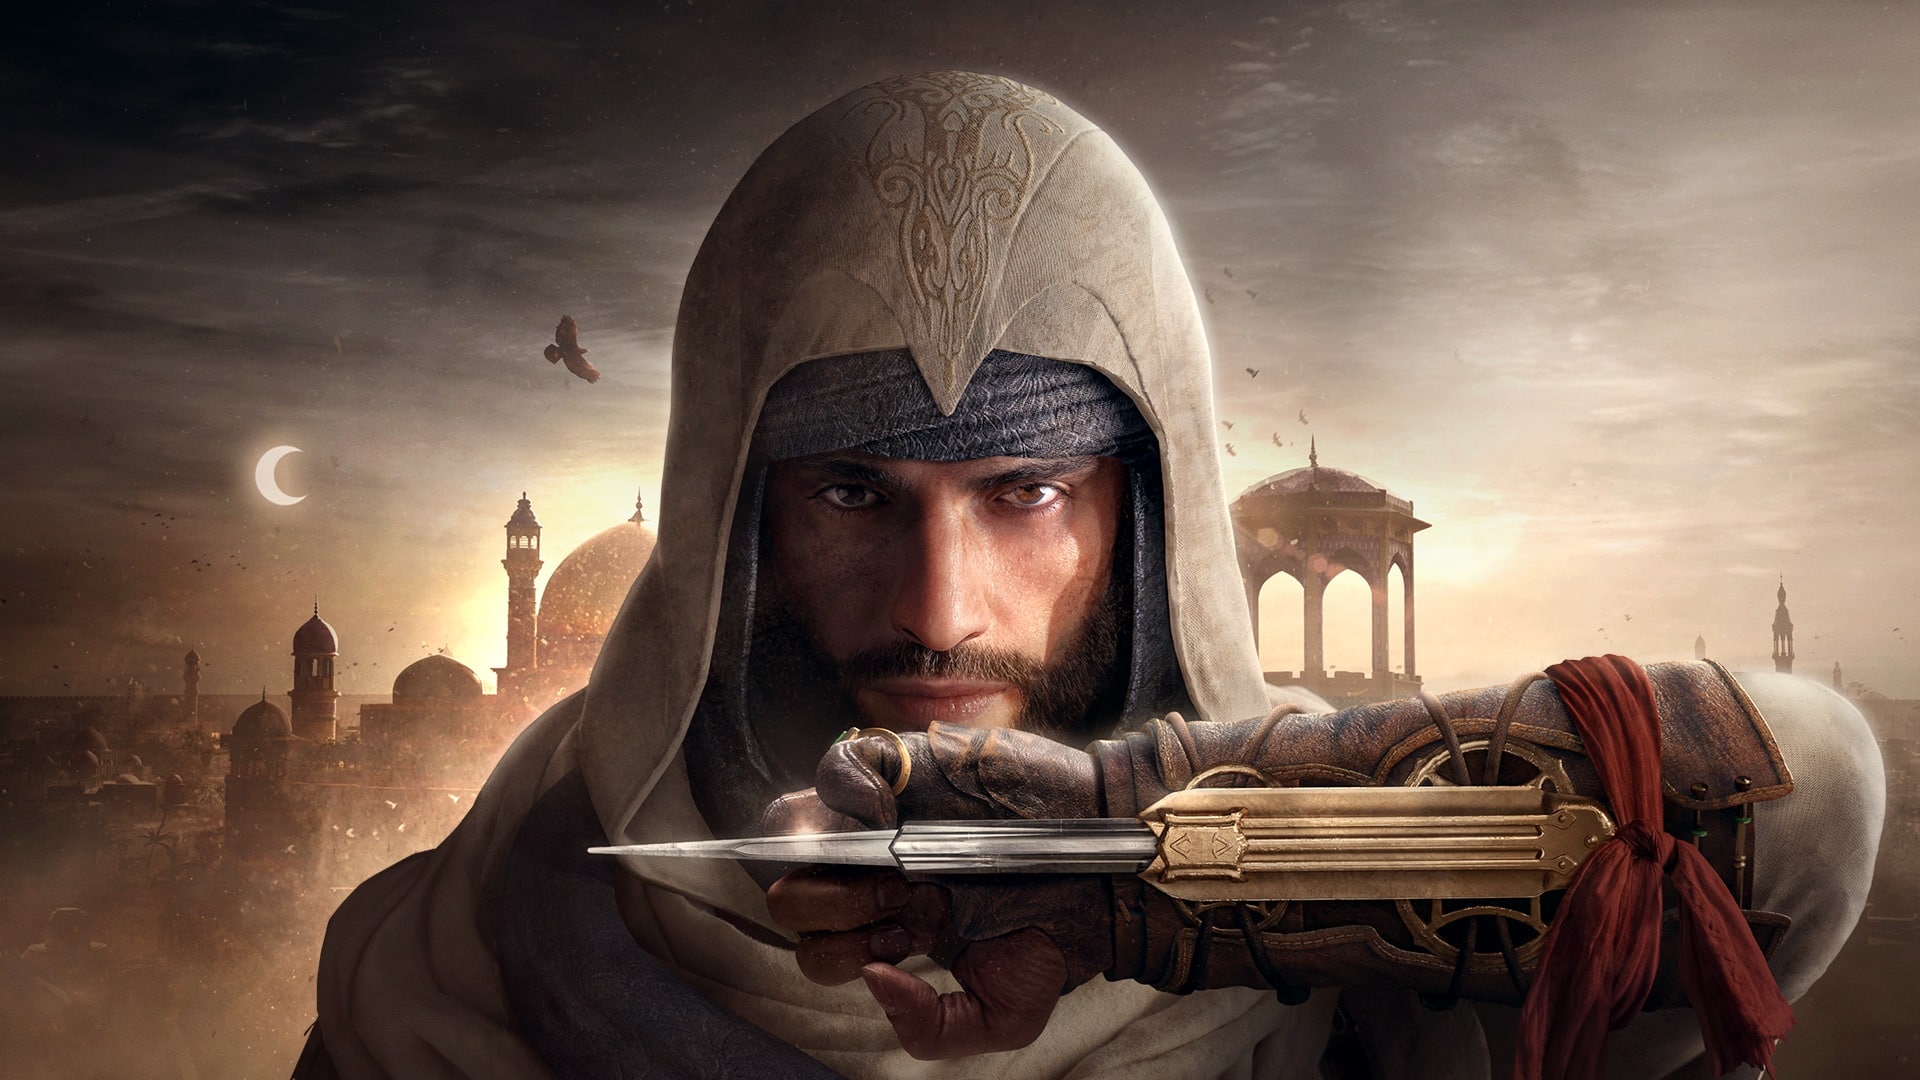 Assassin's Creed Revelations feels cobbled together and